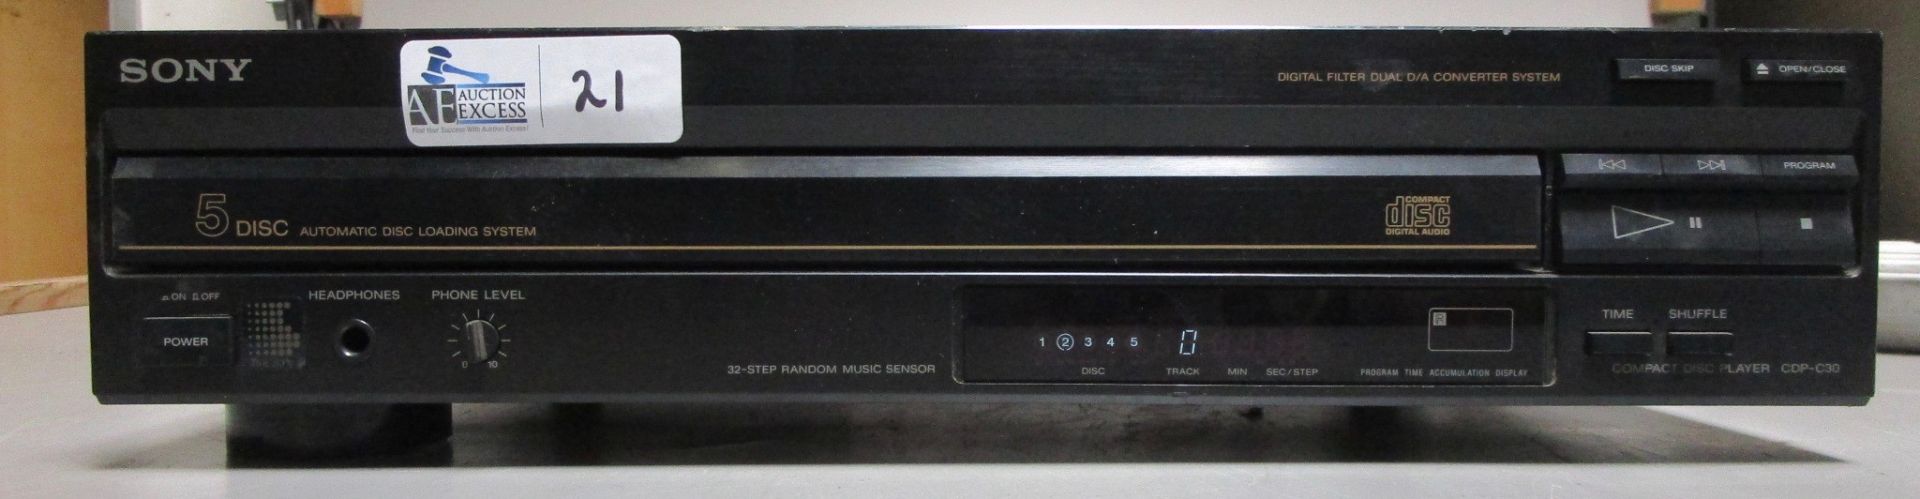 SONY CDP-C30 COMPACT DISC PLAYER